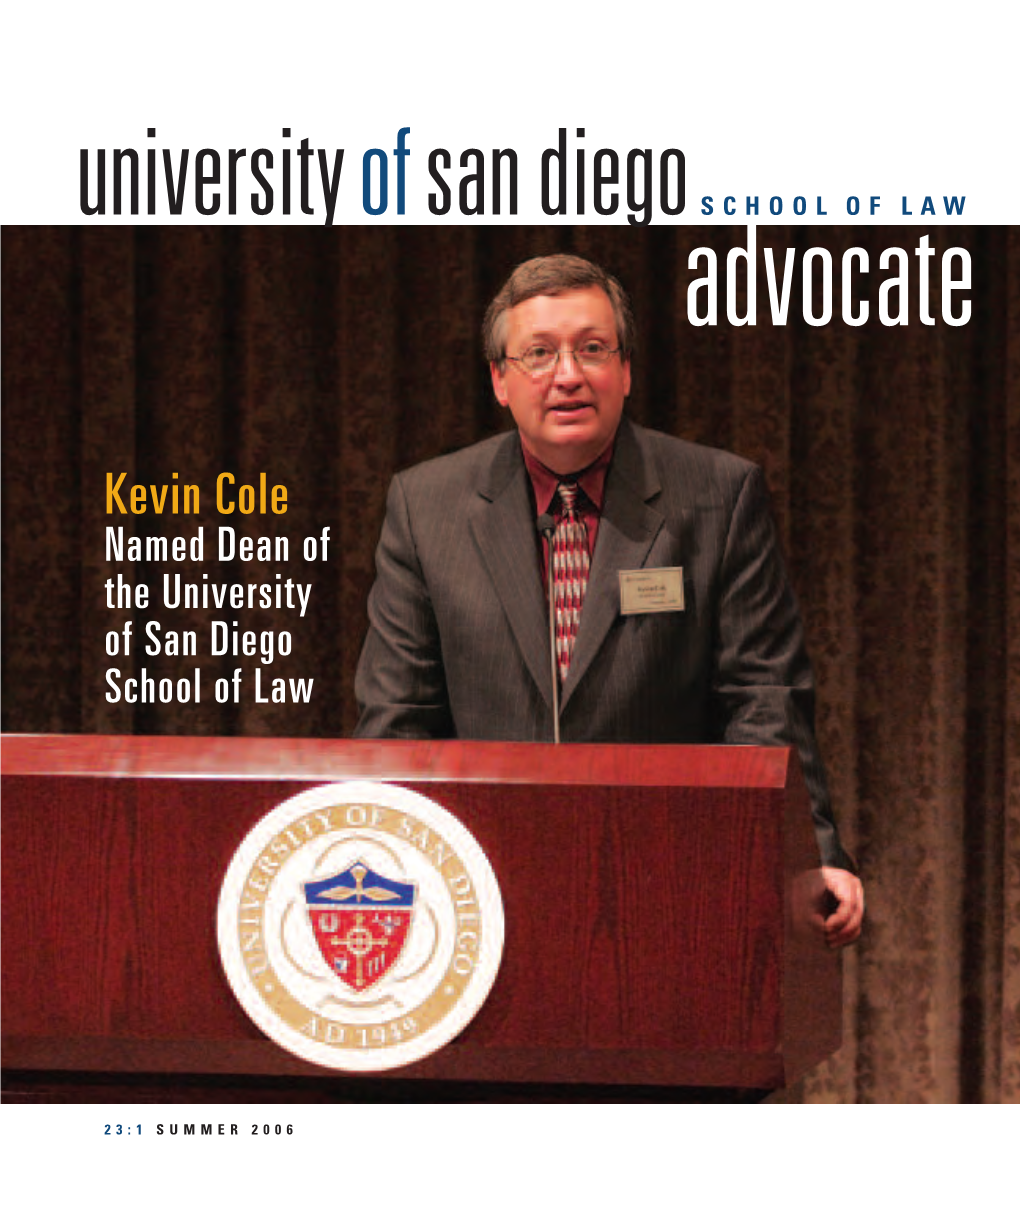 Kevin Cole Named Dean of the University of San Diego School of Law